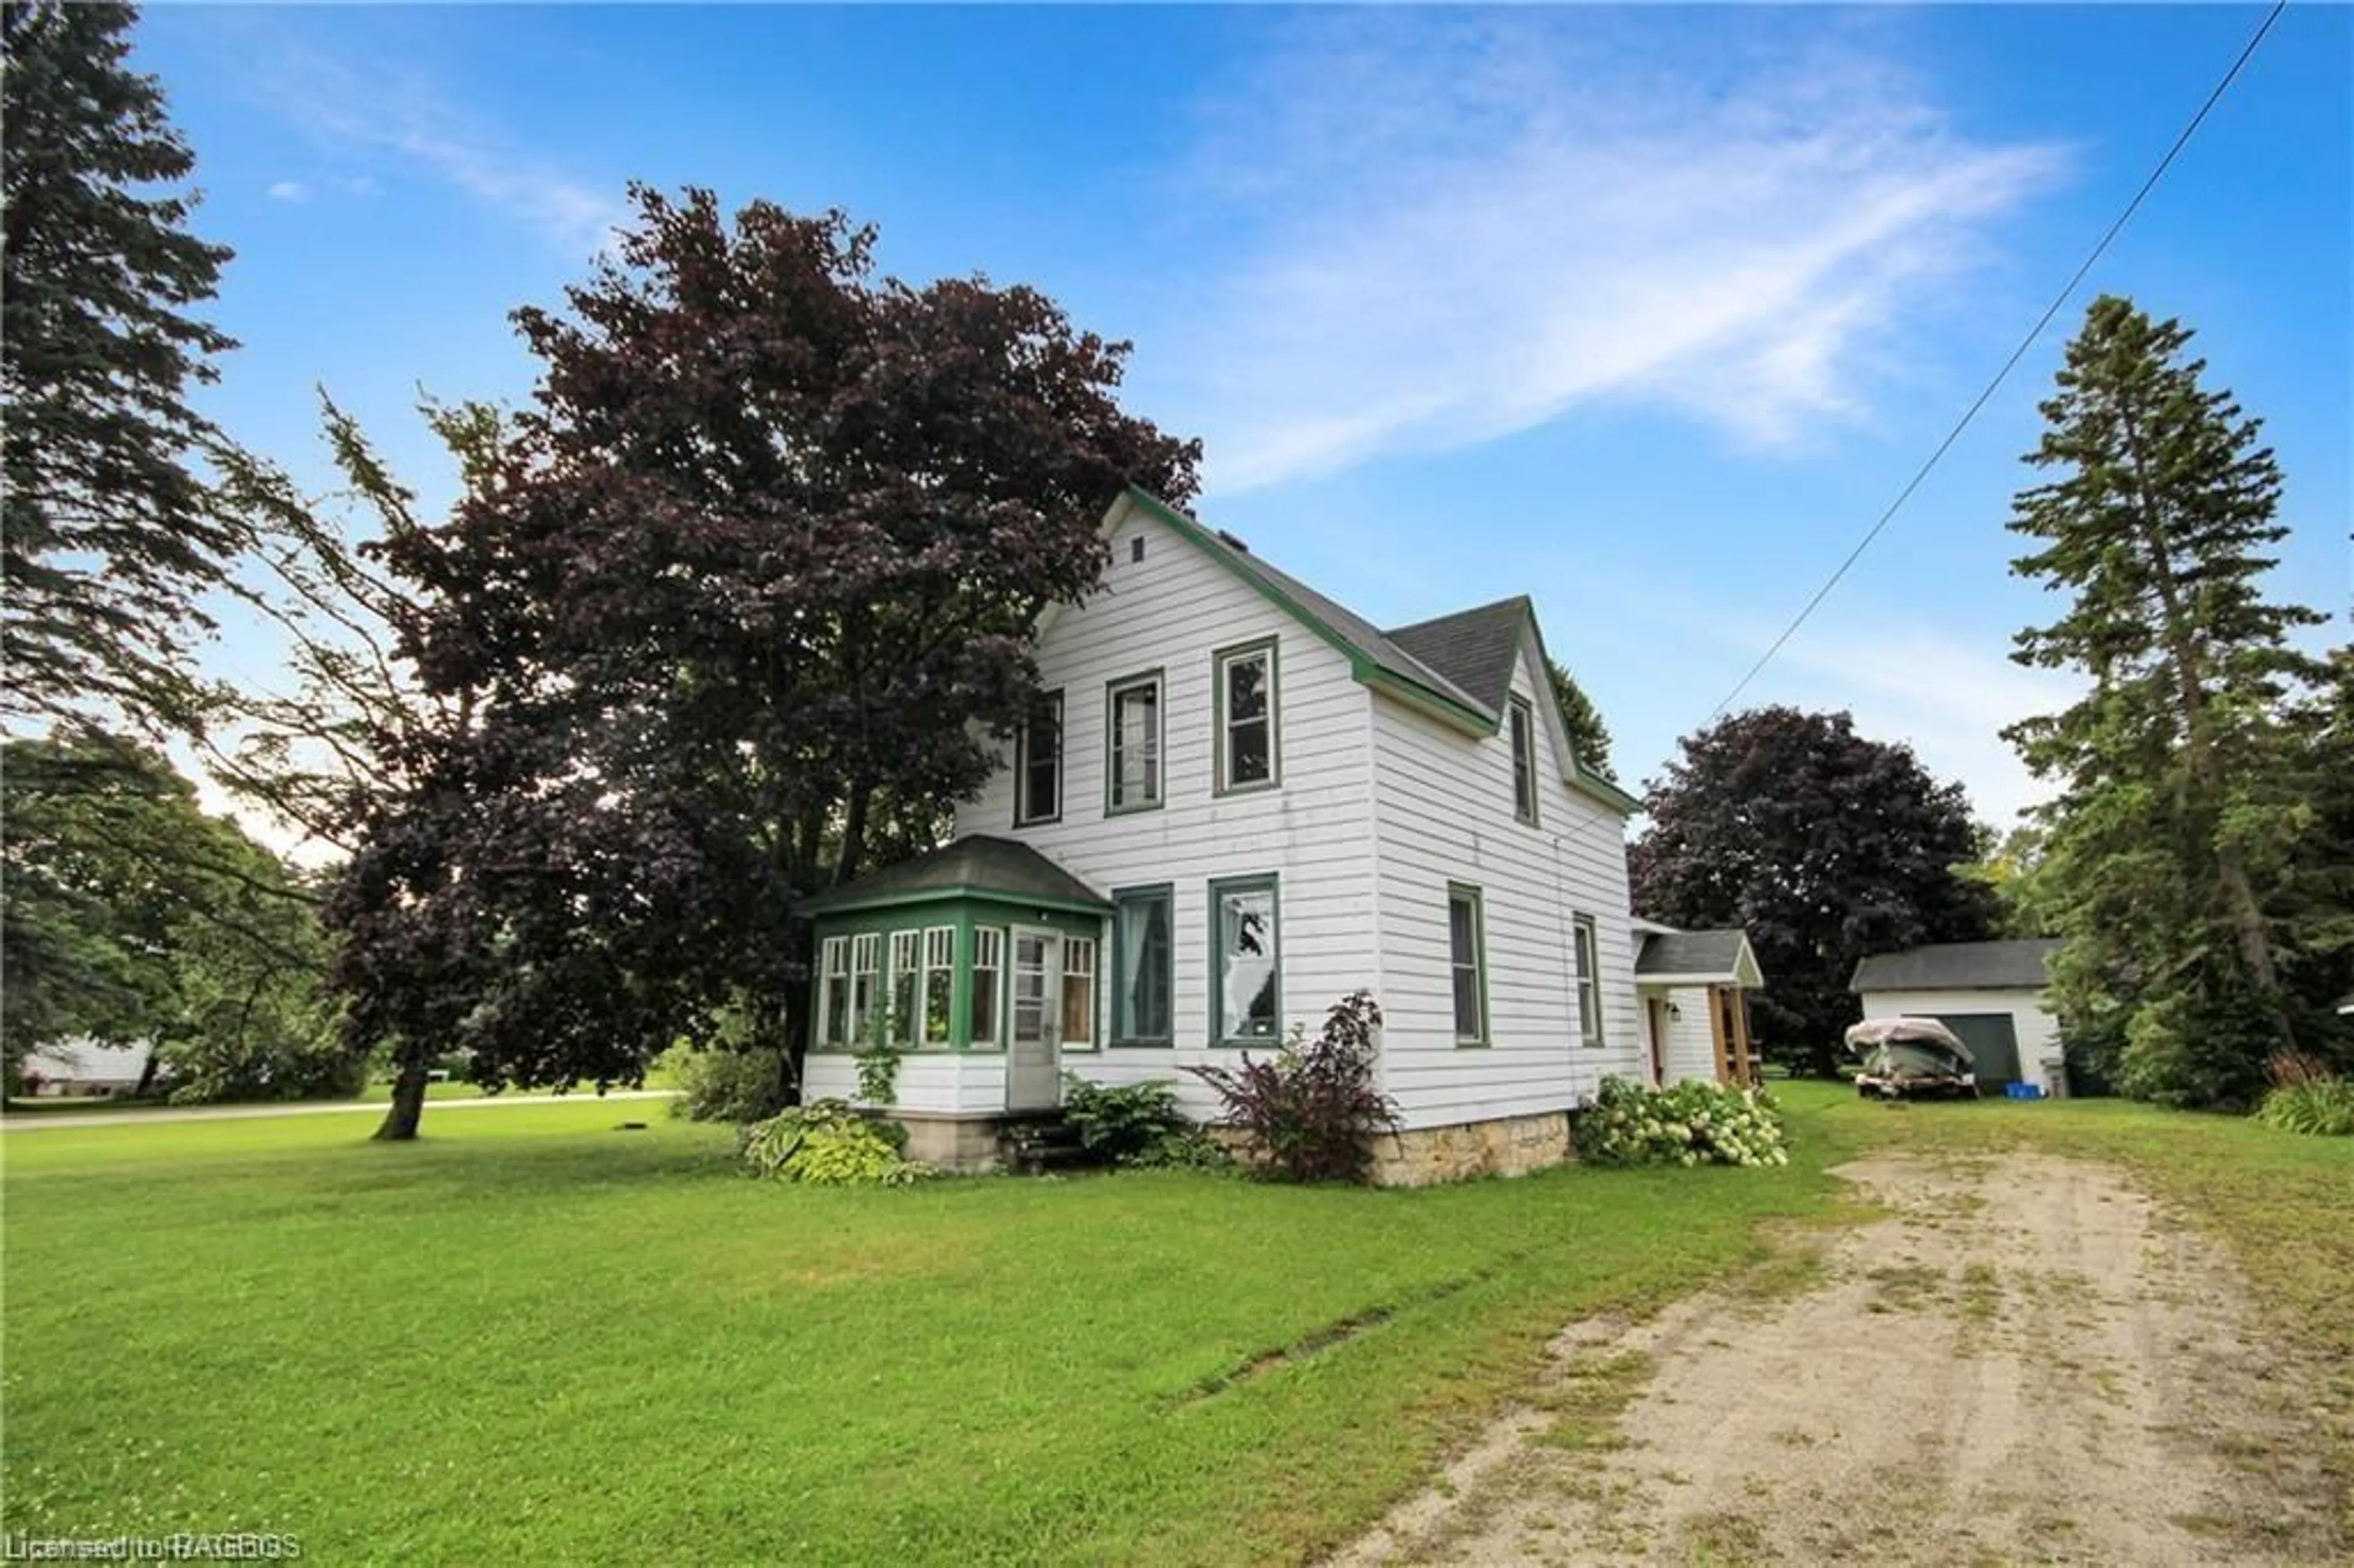 Cottage for 605 Frank St, Wiarton Ontario N0H 2T0